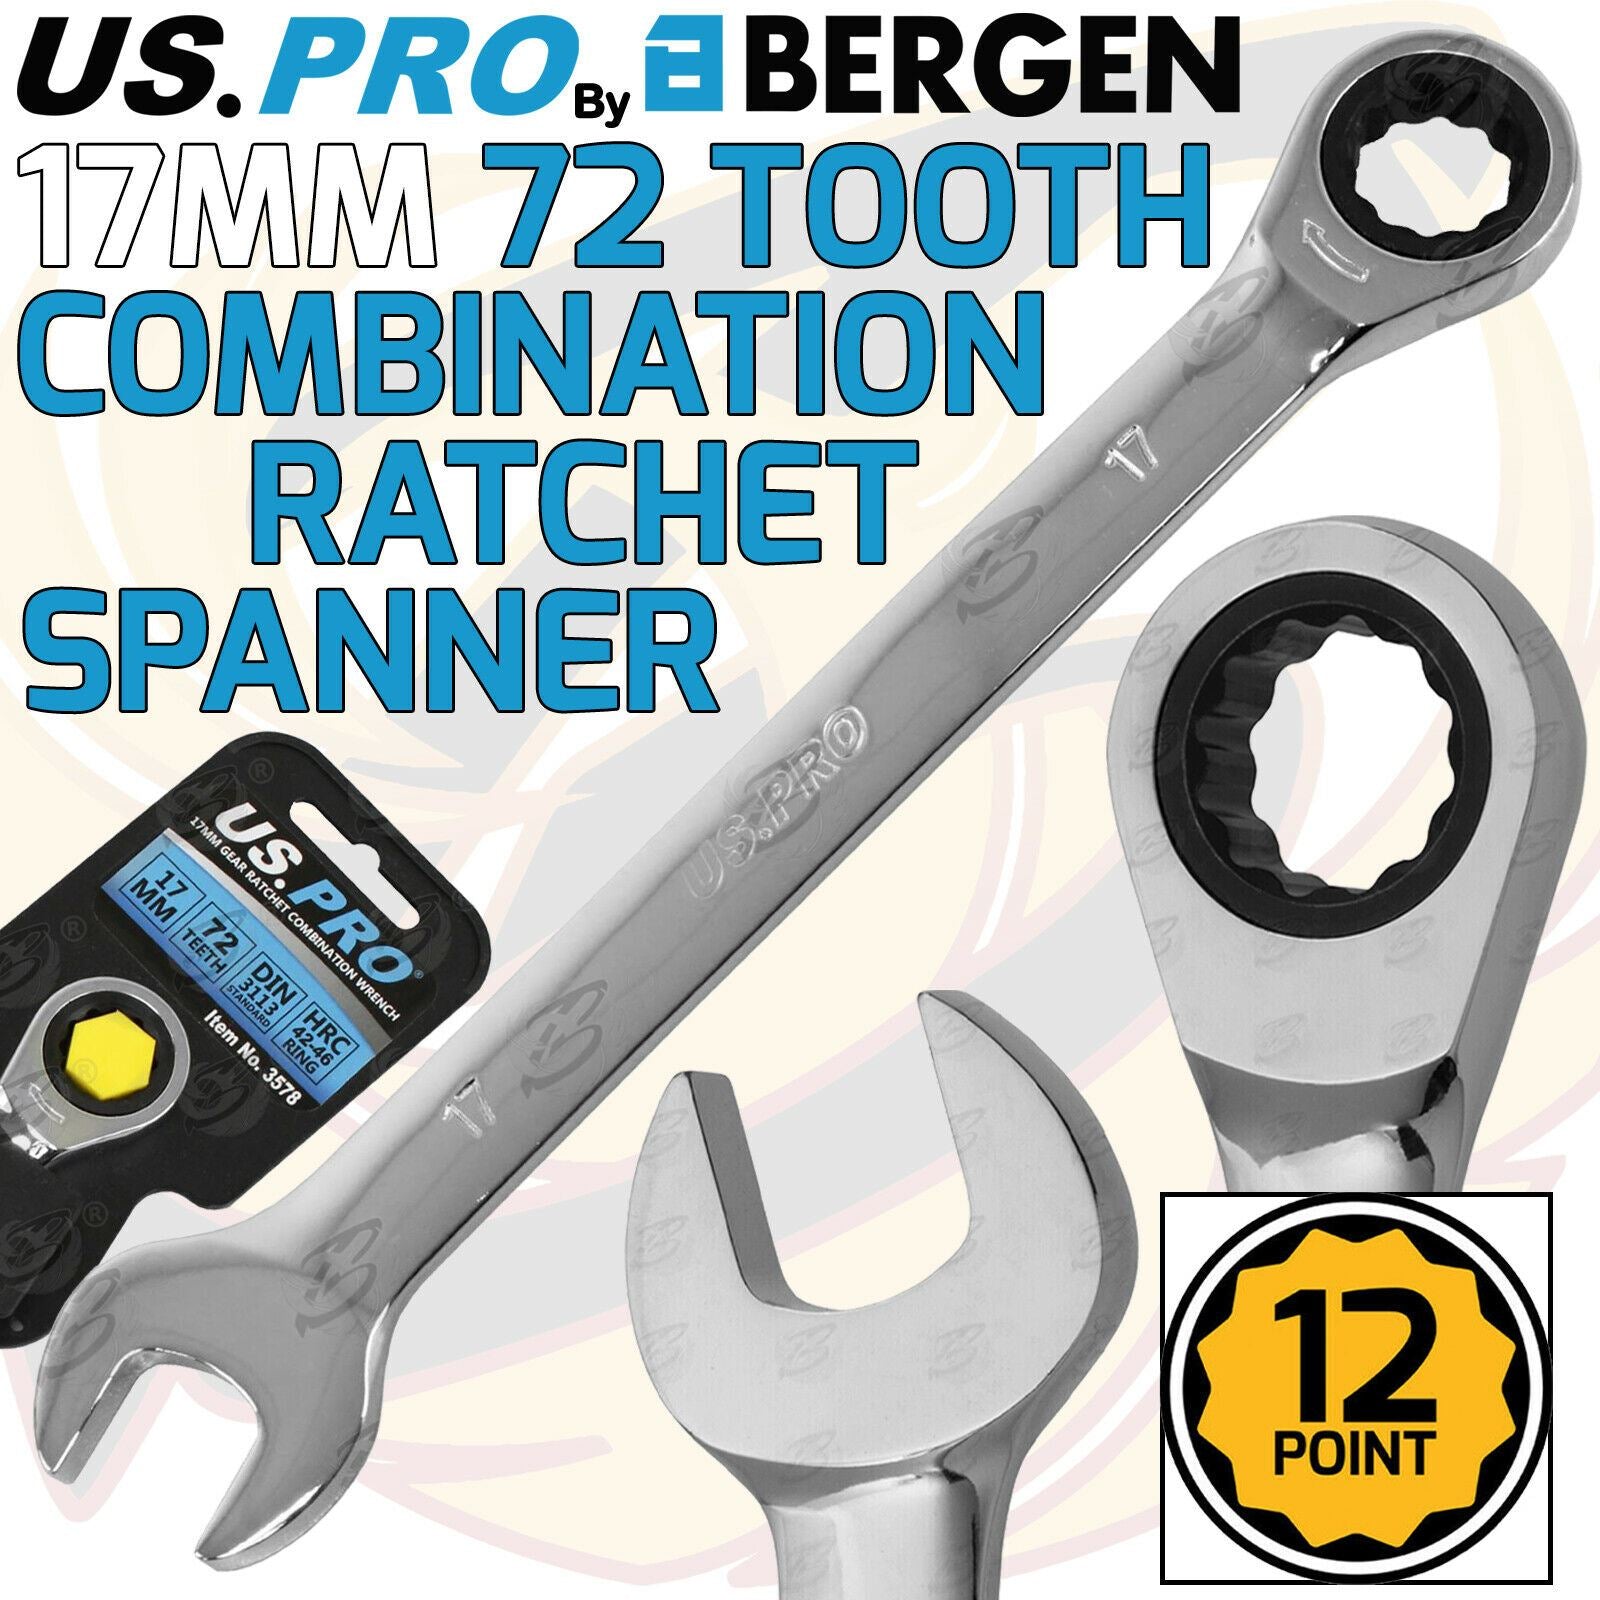 US PRO 17MM 72 TOOTH RATCHET SPANNER